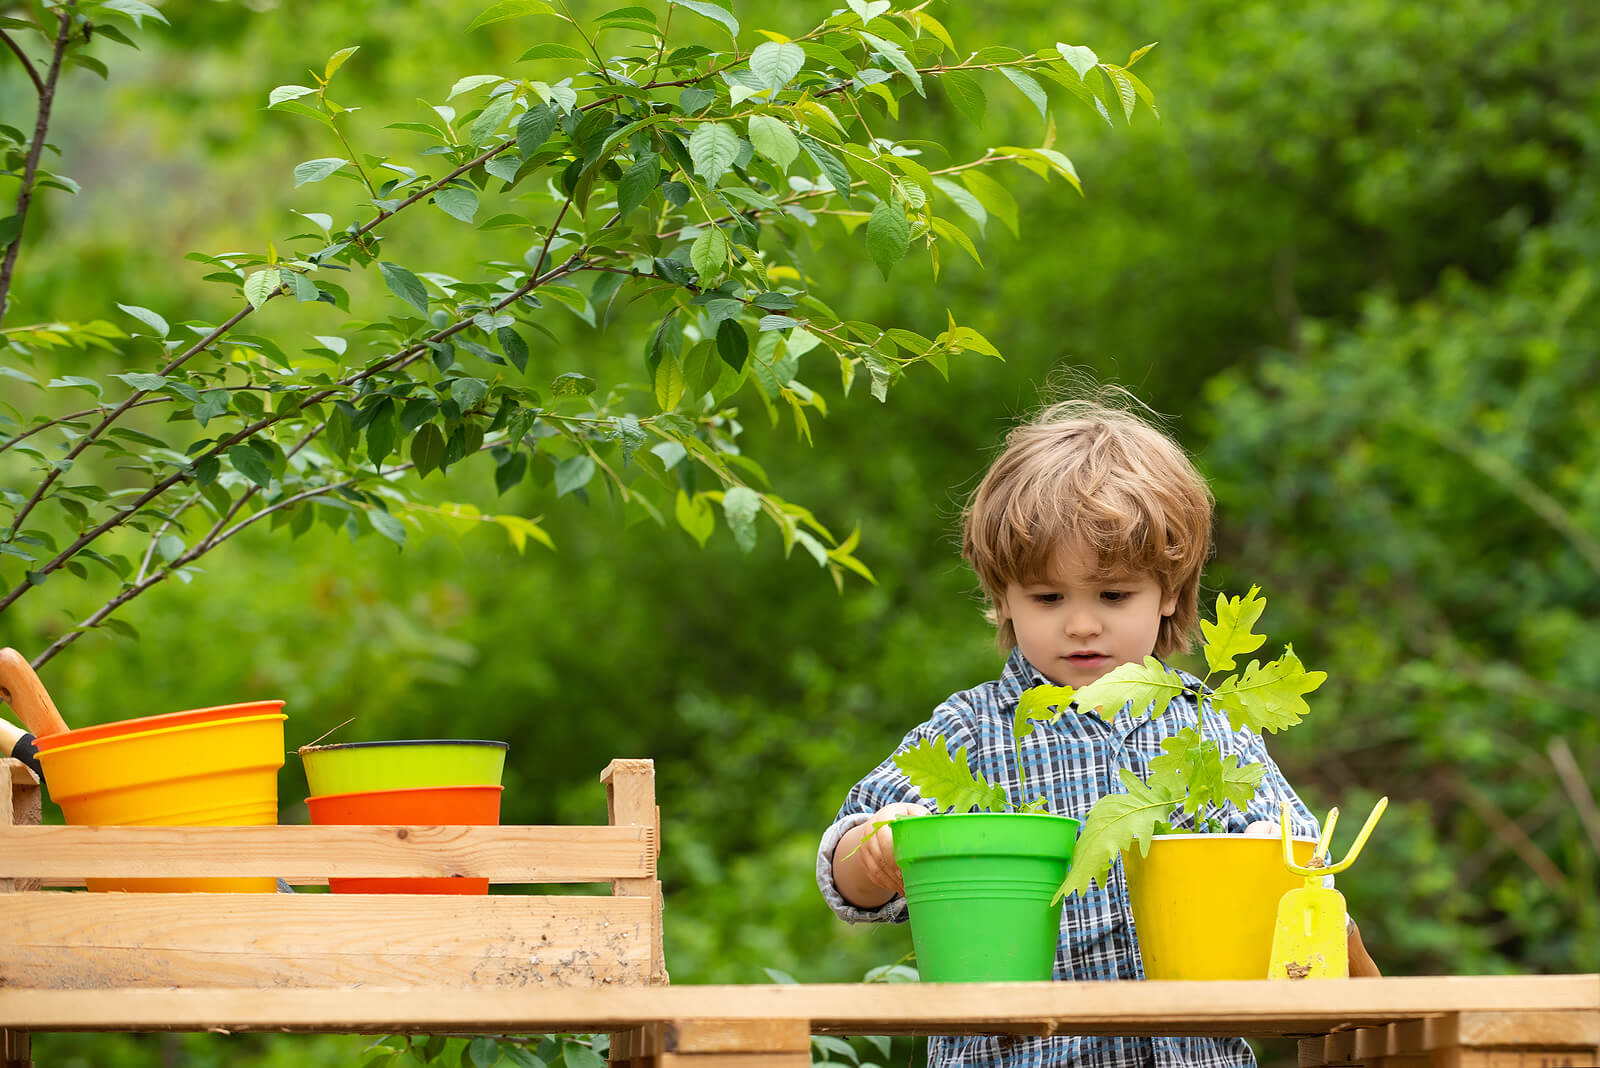 A child planting plants in the garden.